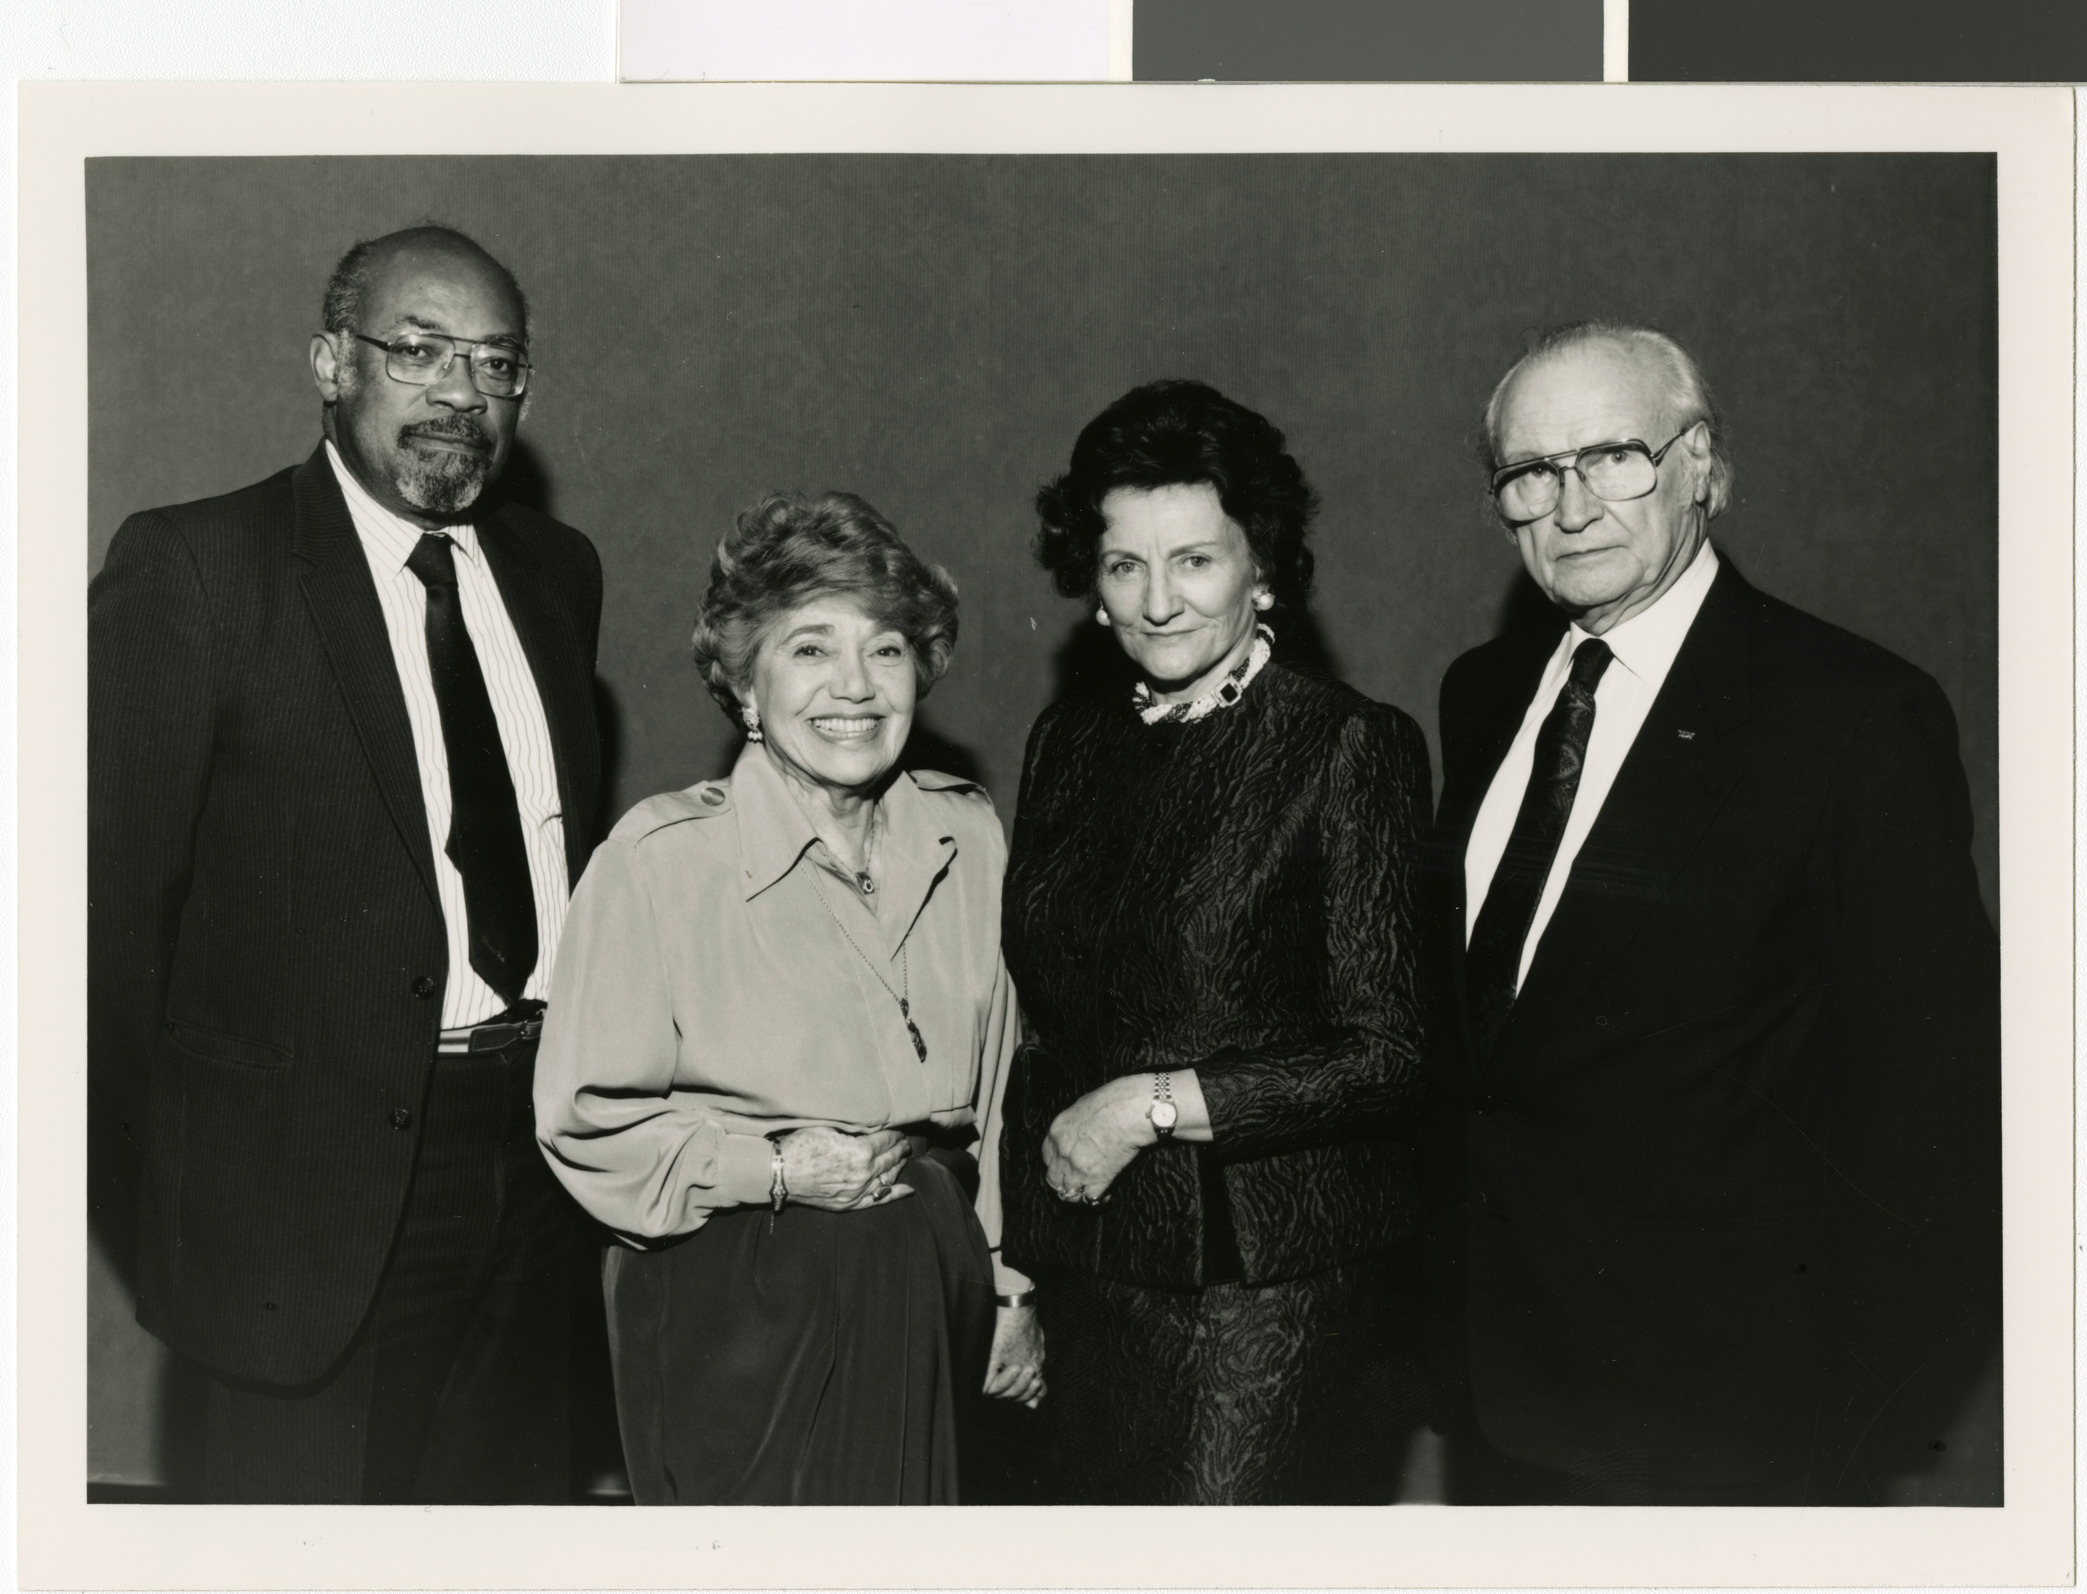 Photographs of the Governor's Conference on "The Universal Implications of the Holocaust," image 02